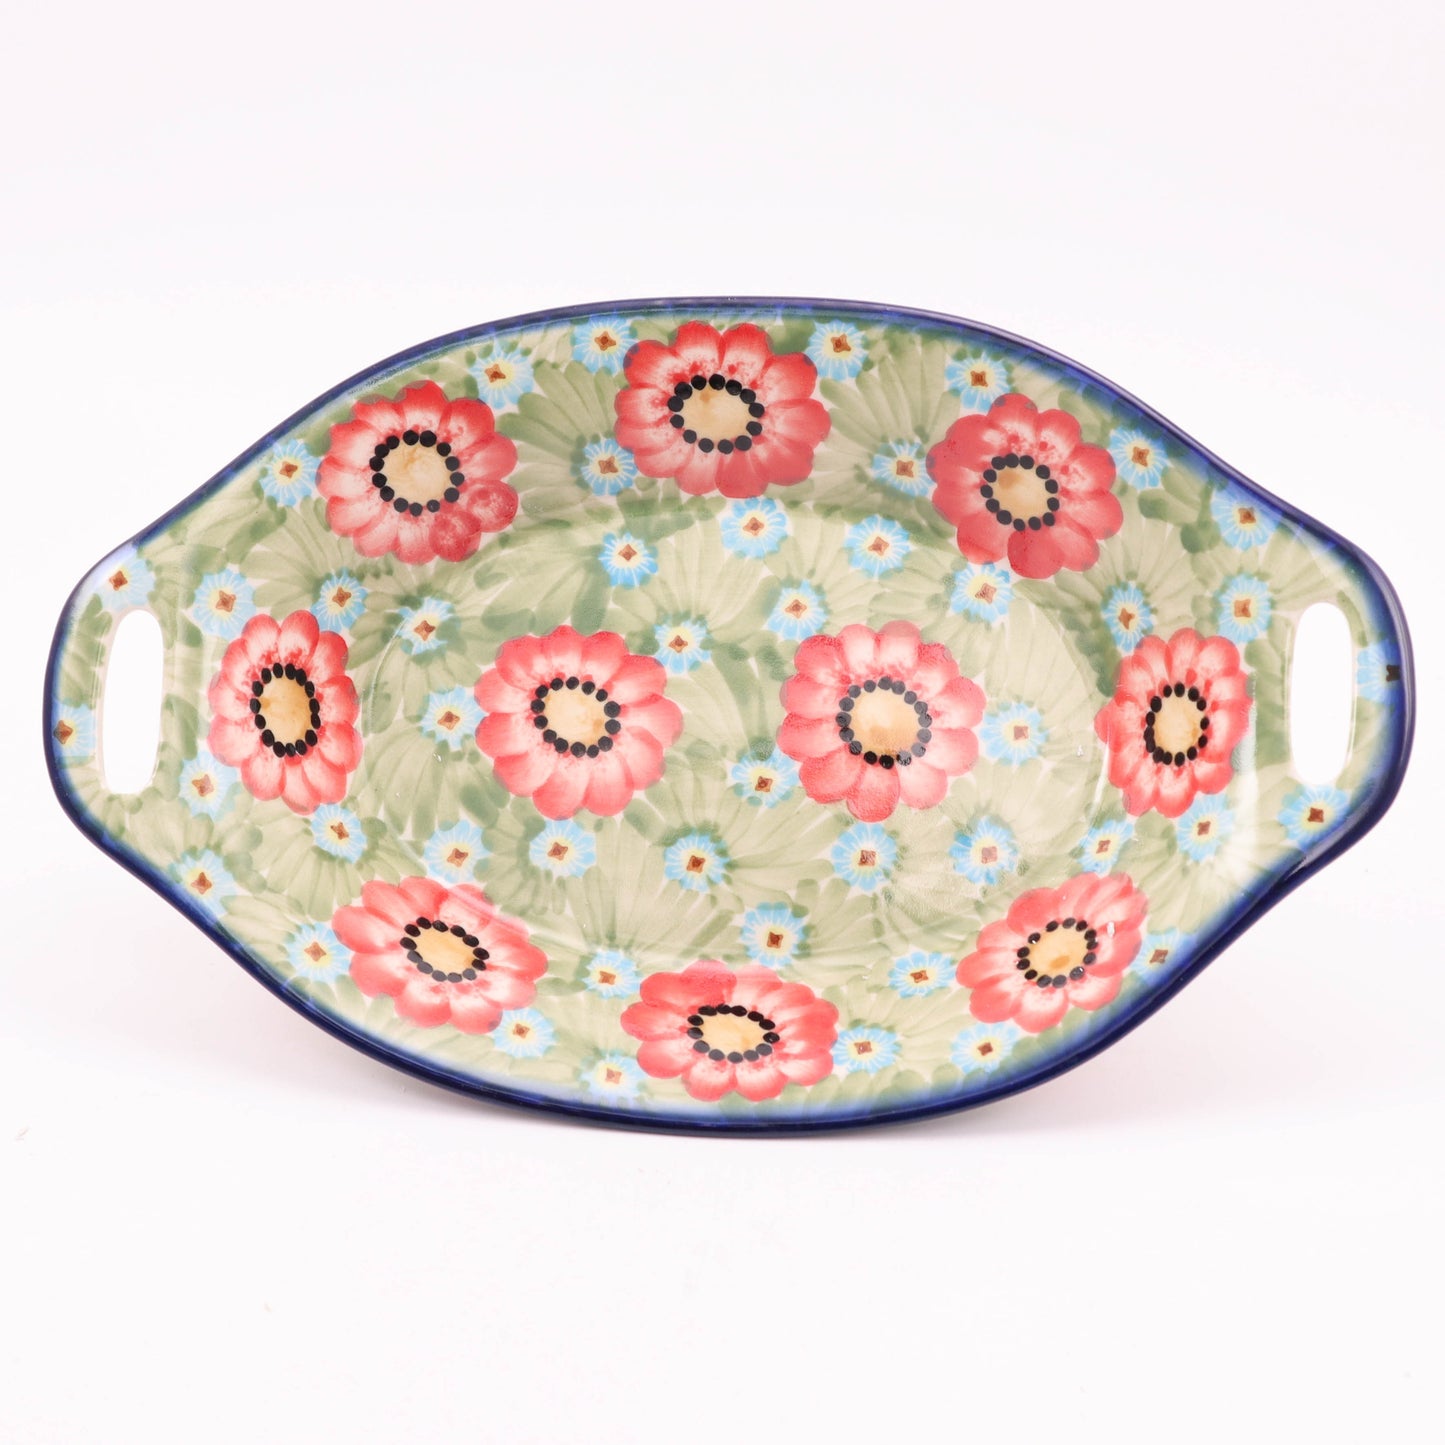 8"x13" Oval Serving Dish with Handles. Pattern: Flower Power